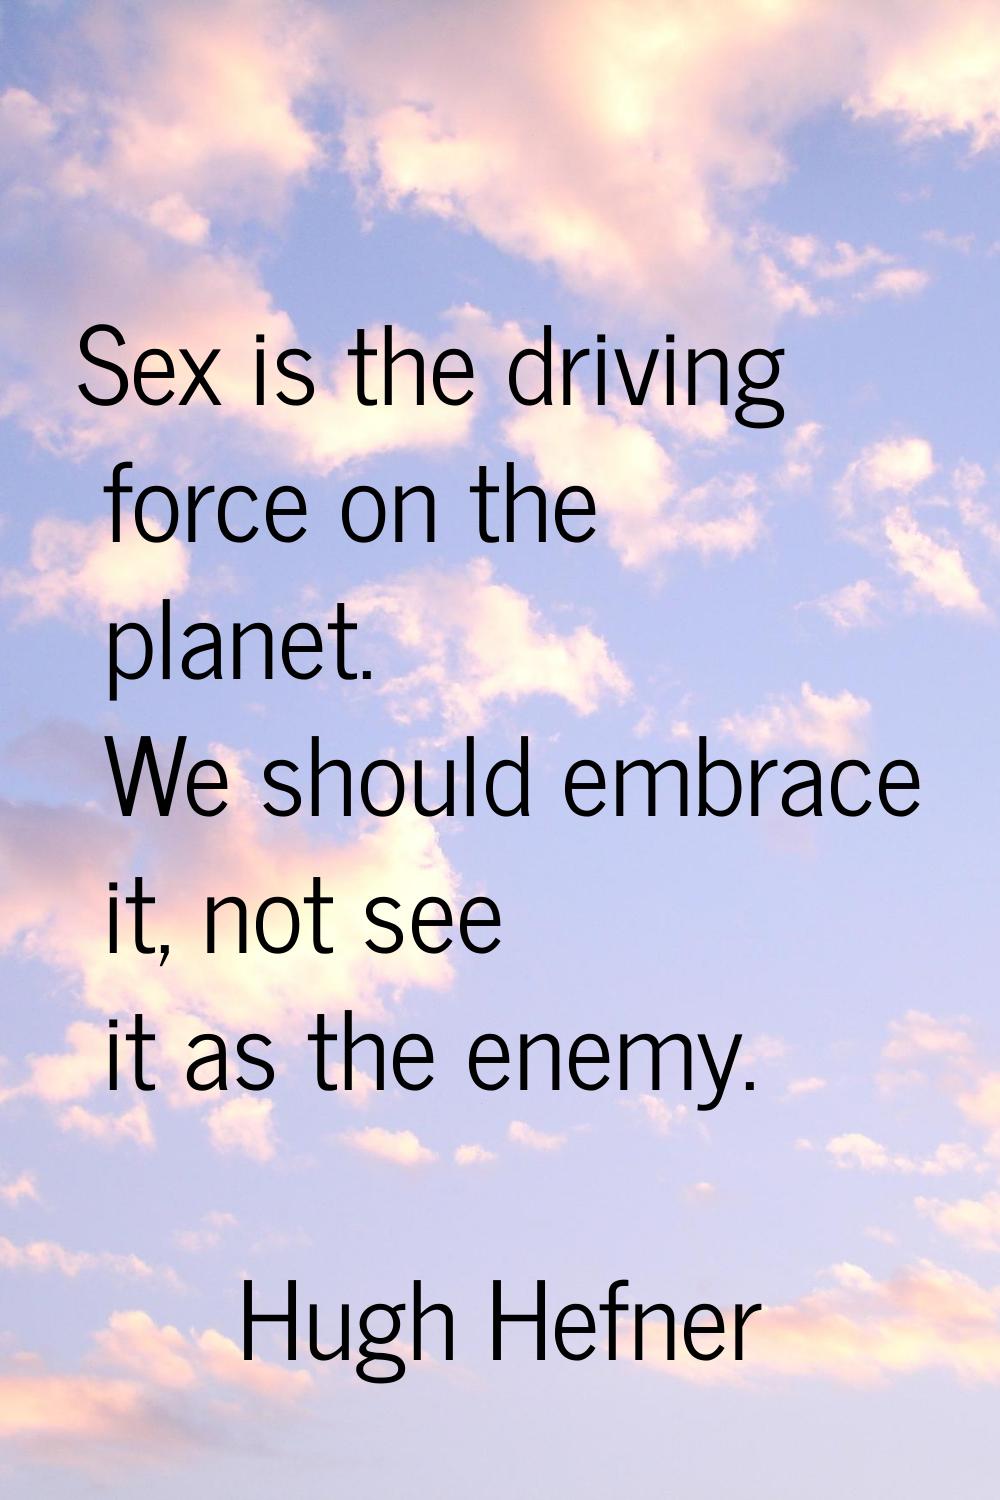 Sex is the driving force on the planet. We should embrace it, not see it as the enemy.